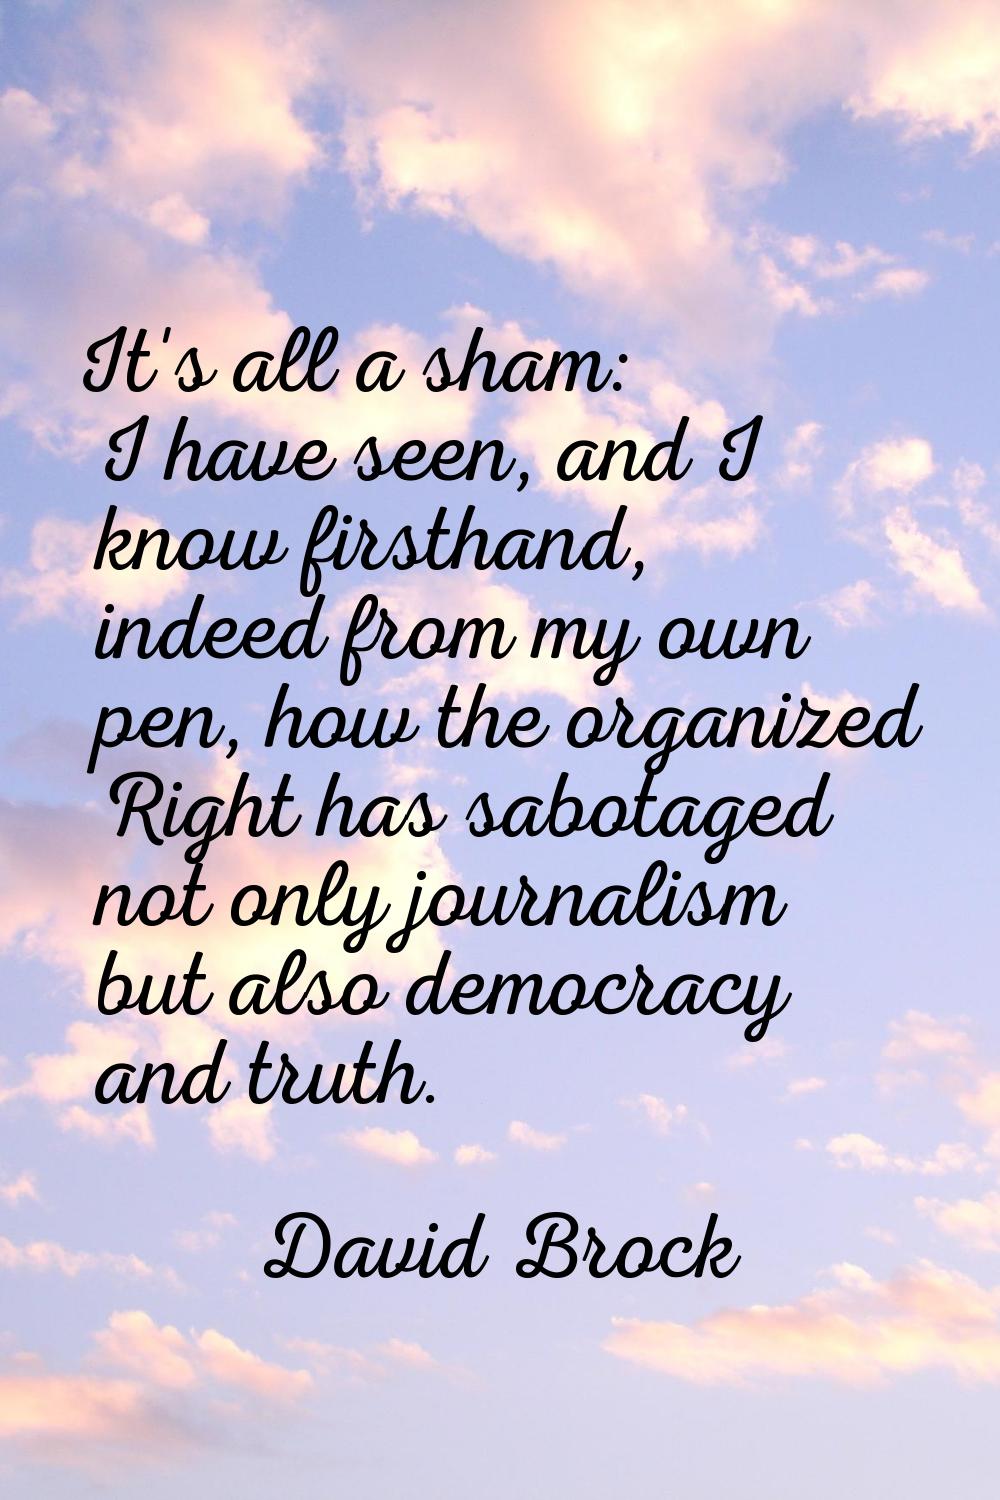 It's all a sham: I have seen, and I know firsthand, indeed from my own pen, how the organized Right